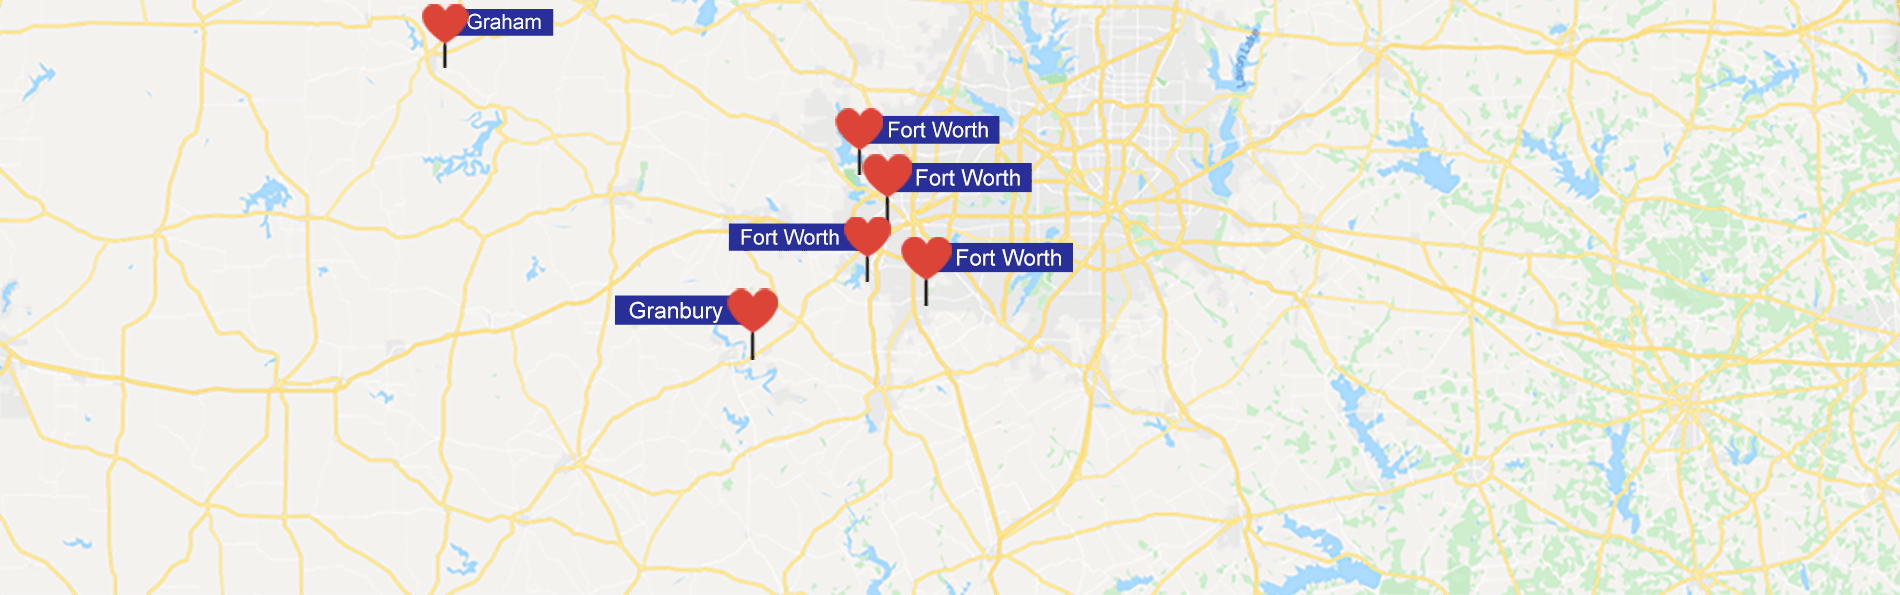 Fort Worth Heart - Our Locations